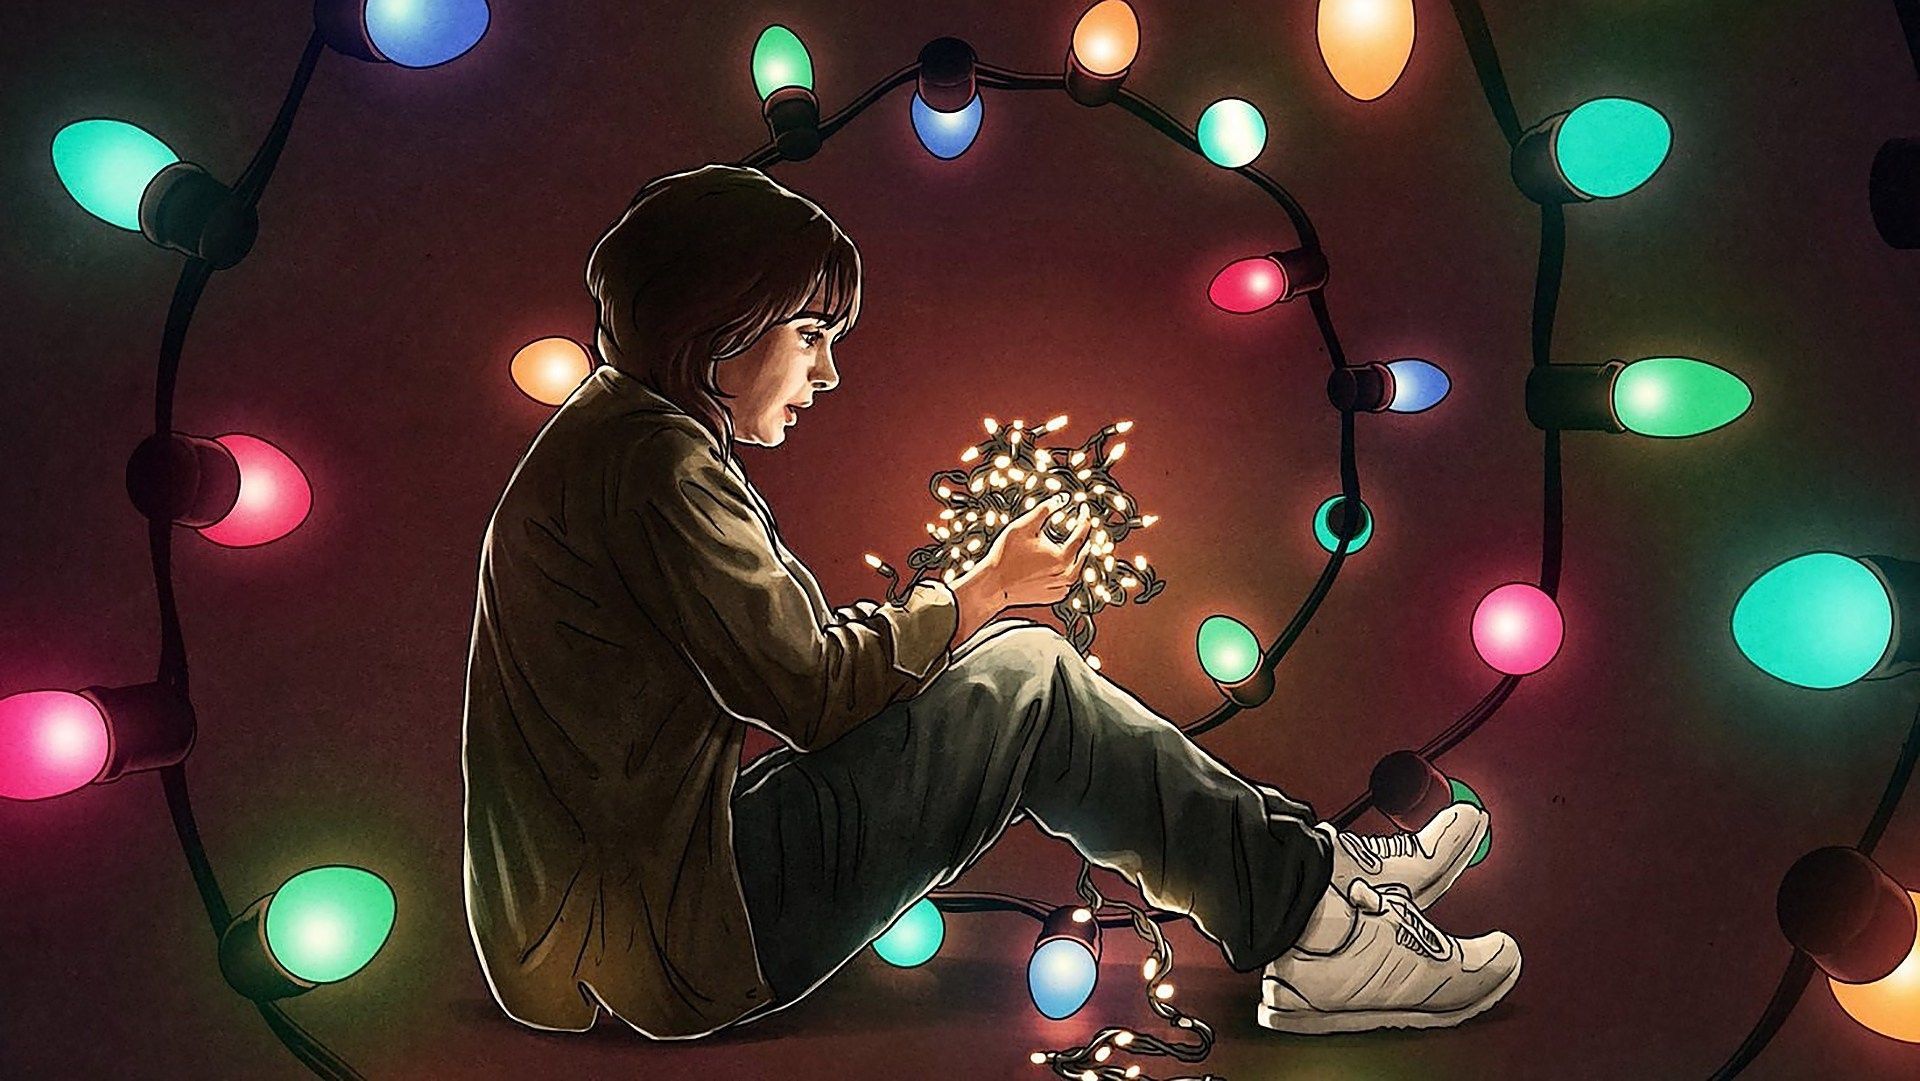 The best Stranger Things artwork is coming to the wall - Stranger Things